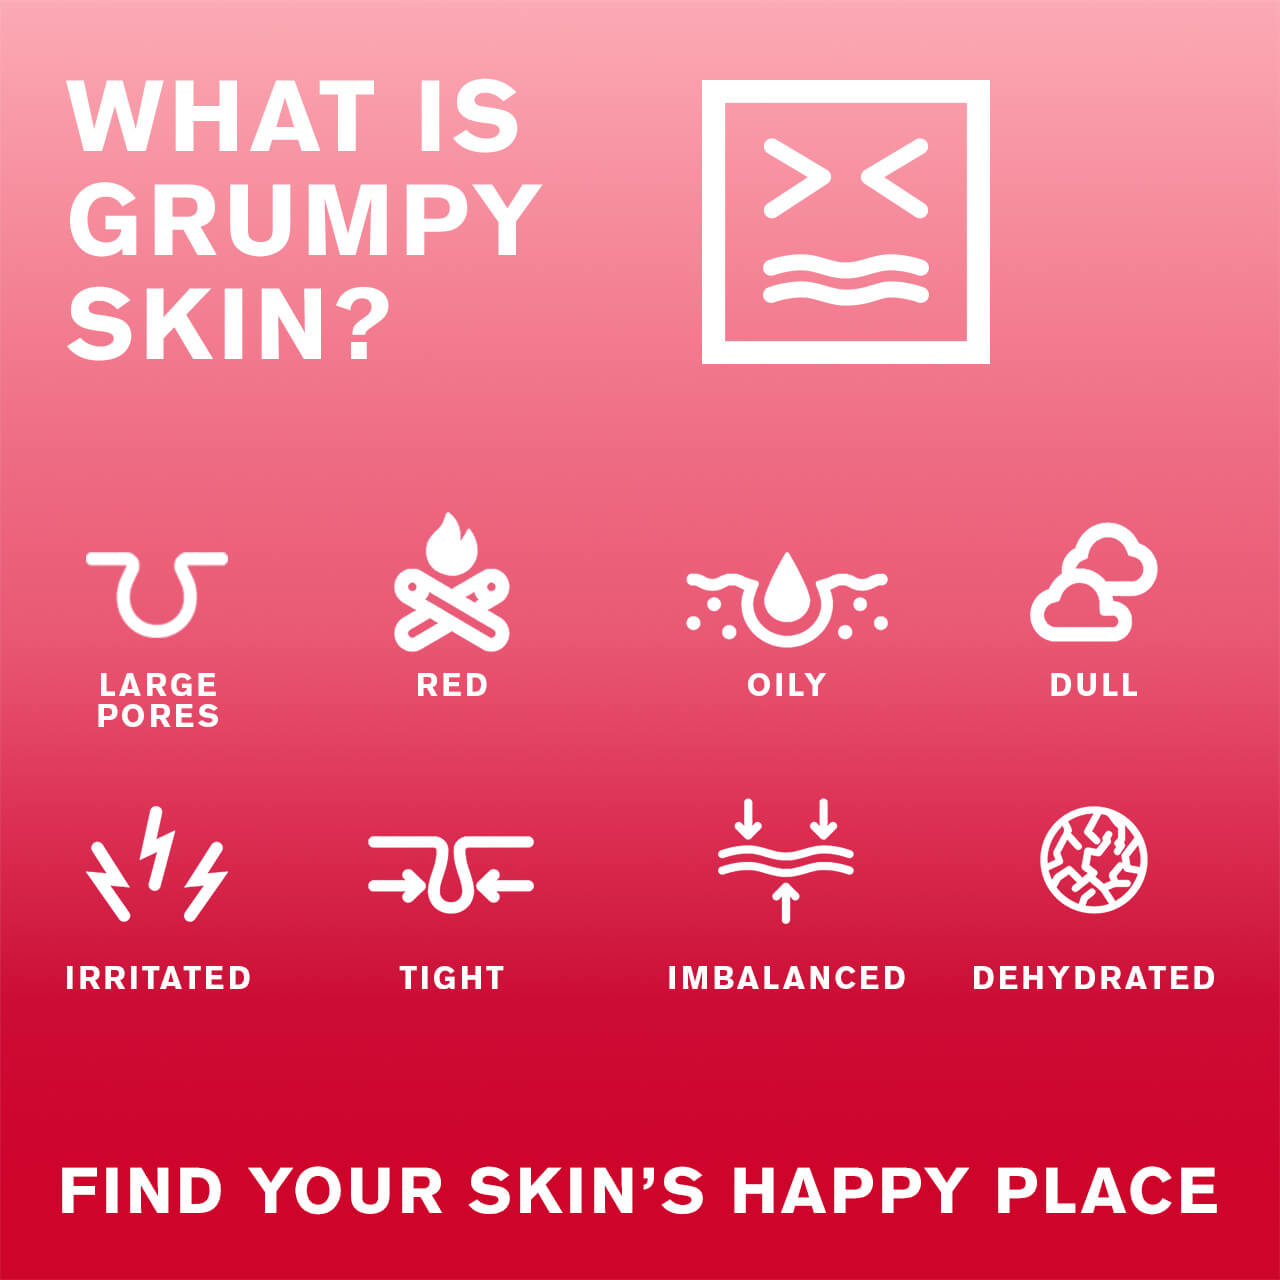 Vad är grumpy hud? Large Pores Red Oily Dull Irritated Tight Imbalanced Dehydrated. Find your skin's happy place